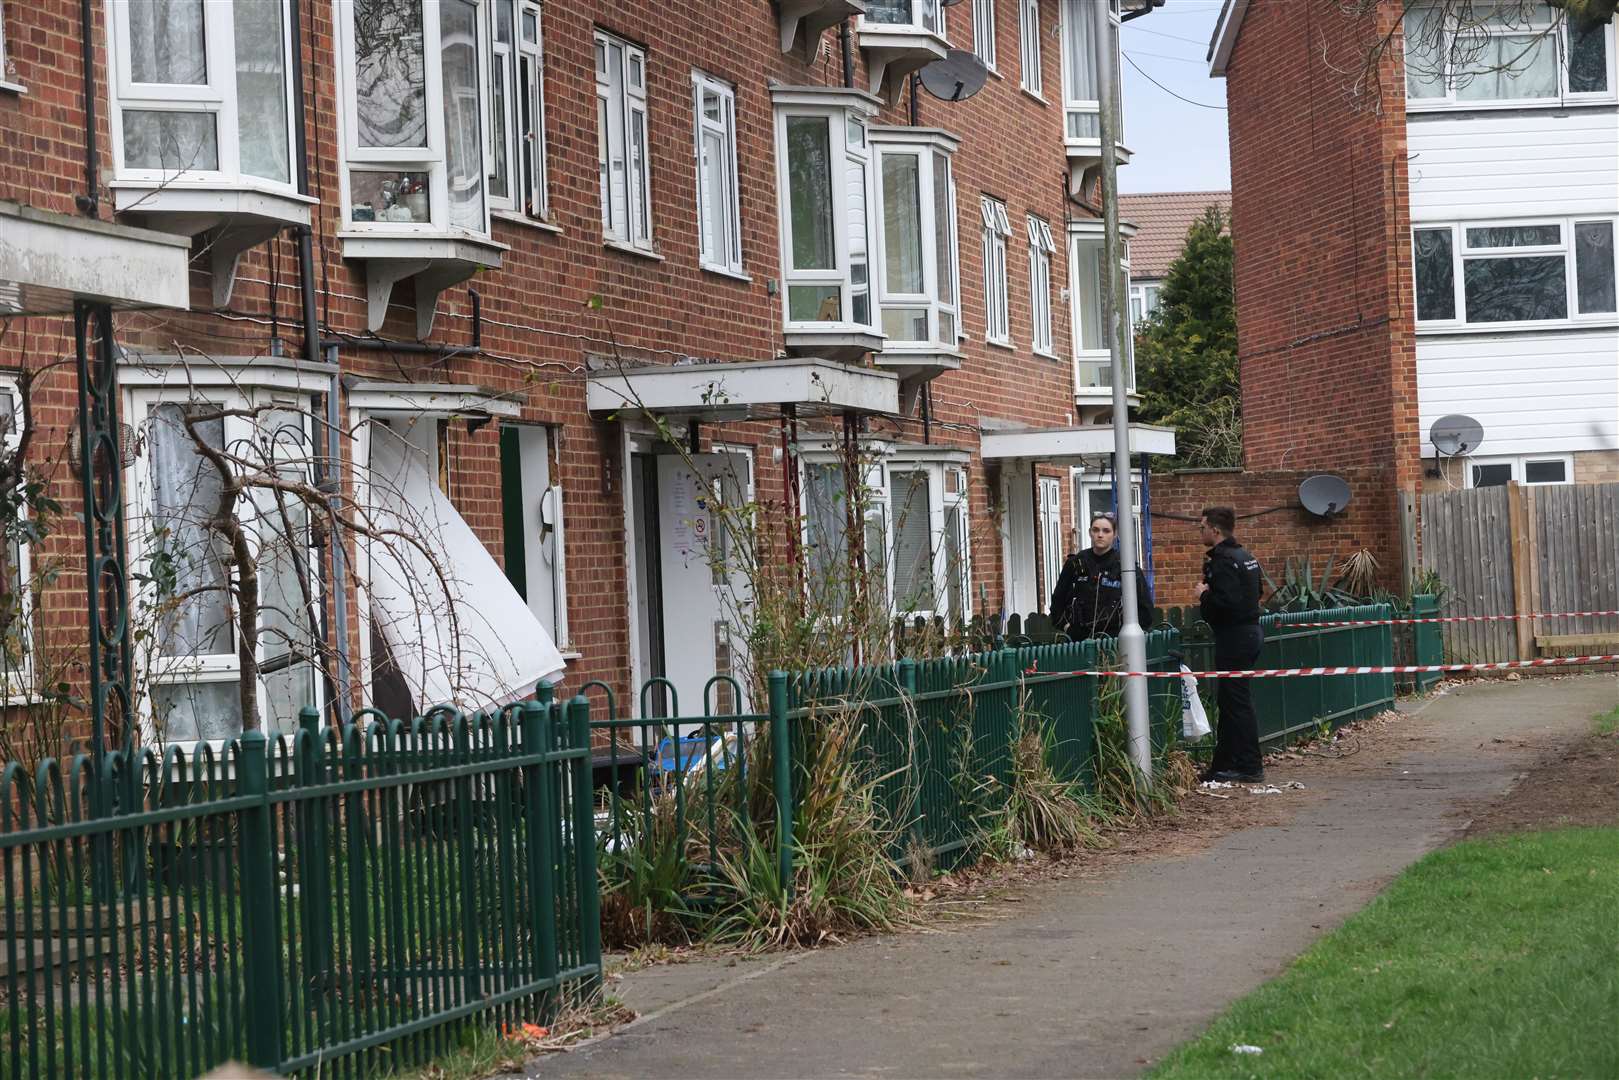 The flats in Catlyn Close, East Malling, were cordoned off after the blast. Photo: UKNIP